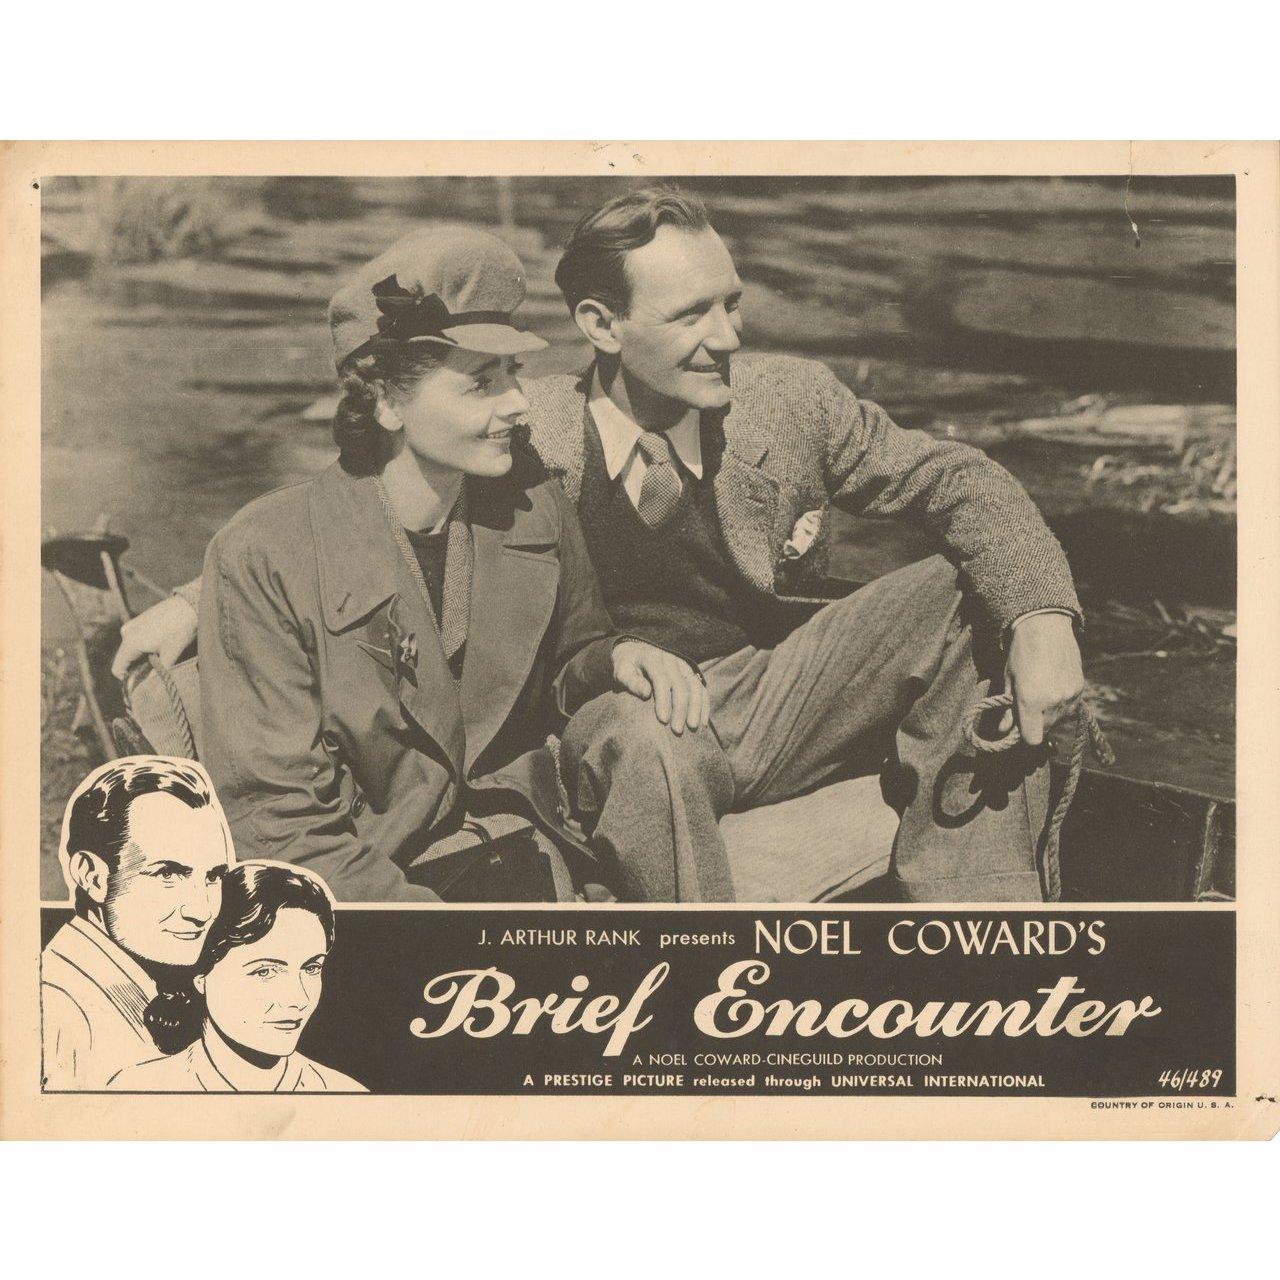 Original 1946 U.S. scene card for the film Brief Encounter directed by David Lean with Celia Johnson / Trevor Howard / Stanley Holloway / Joyce Carey. Very Good-Fine condition. Please note: the size is stated in inches and the actual size can vary